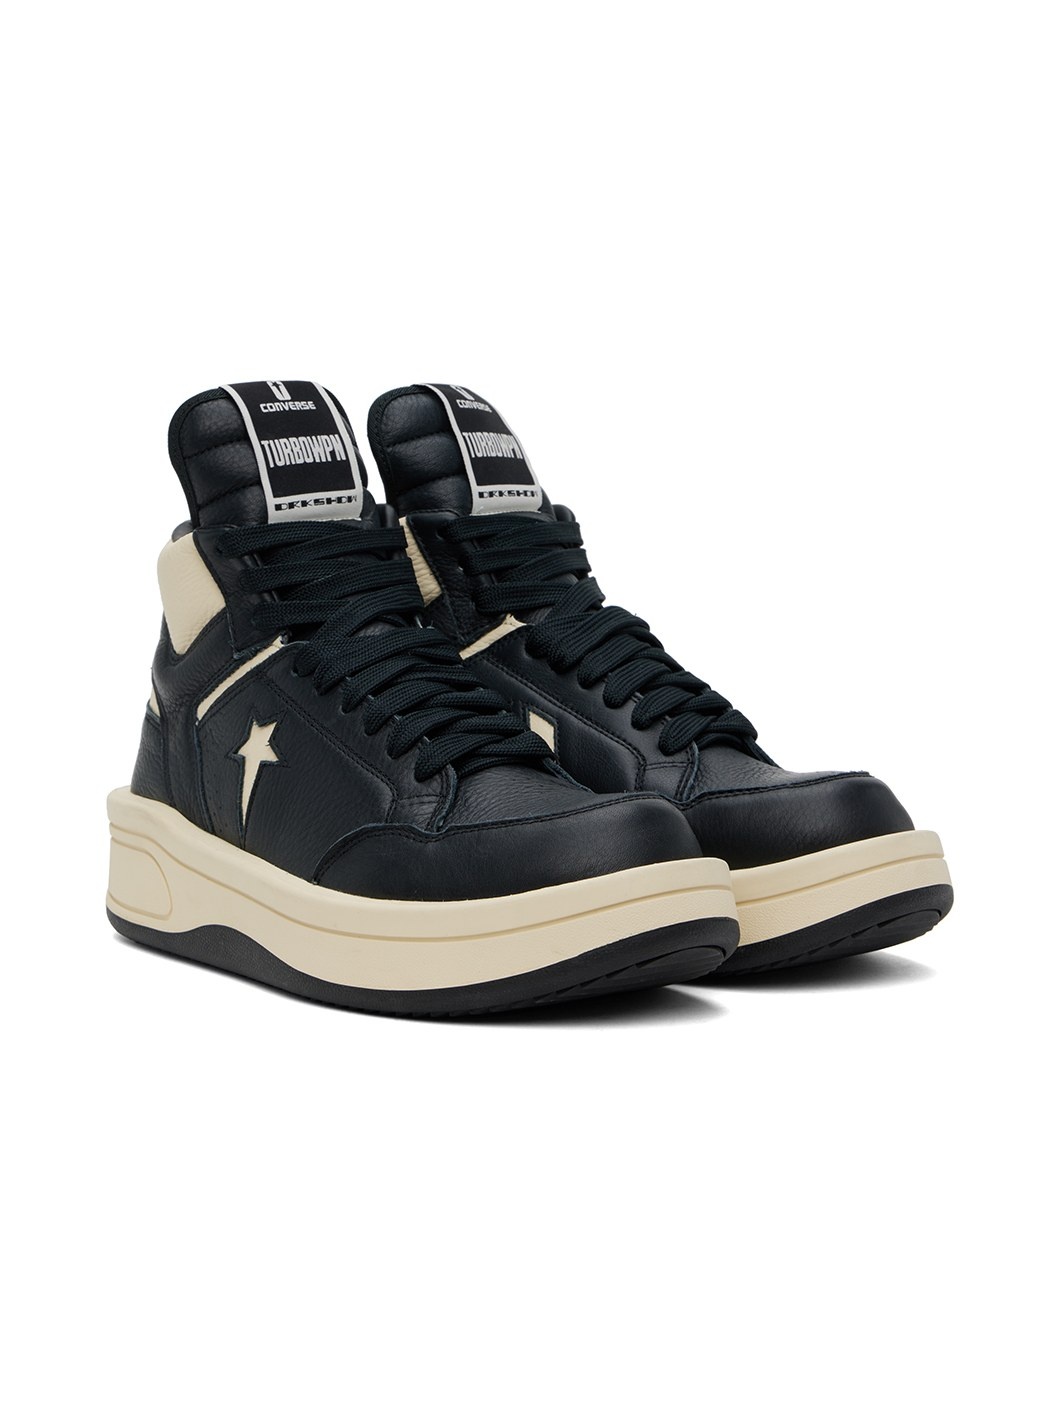 Black Converse Edition TURBOWPN Mid Sneakers - 4